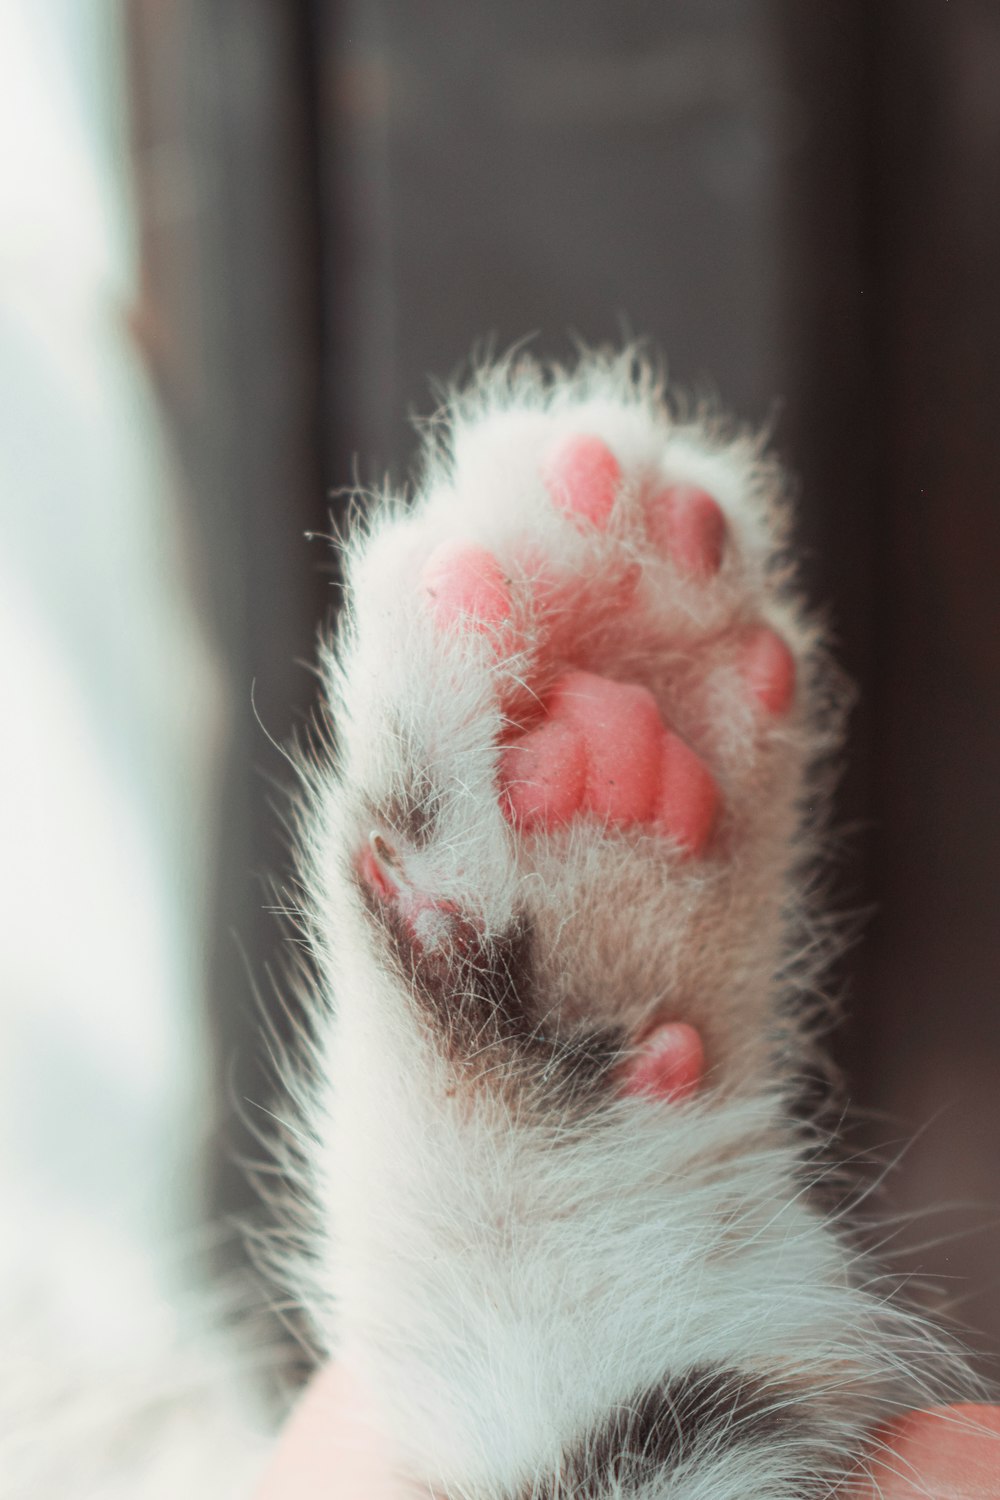 a close up of a person holding a cat paw